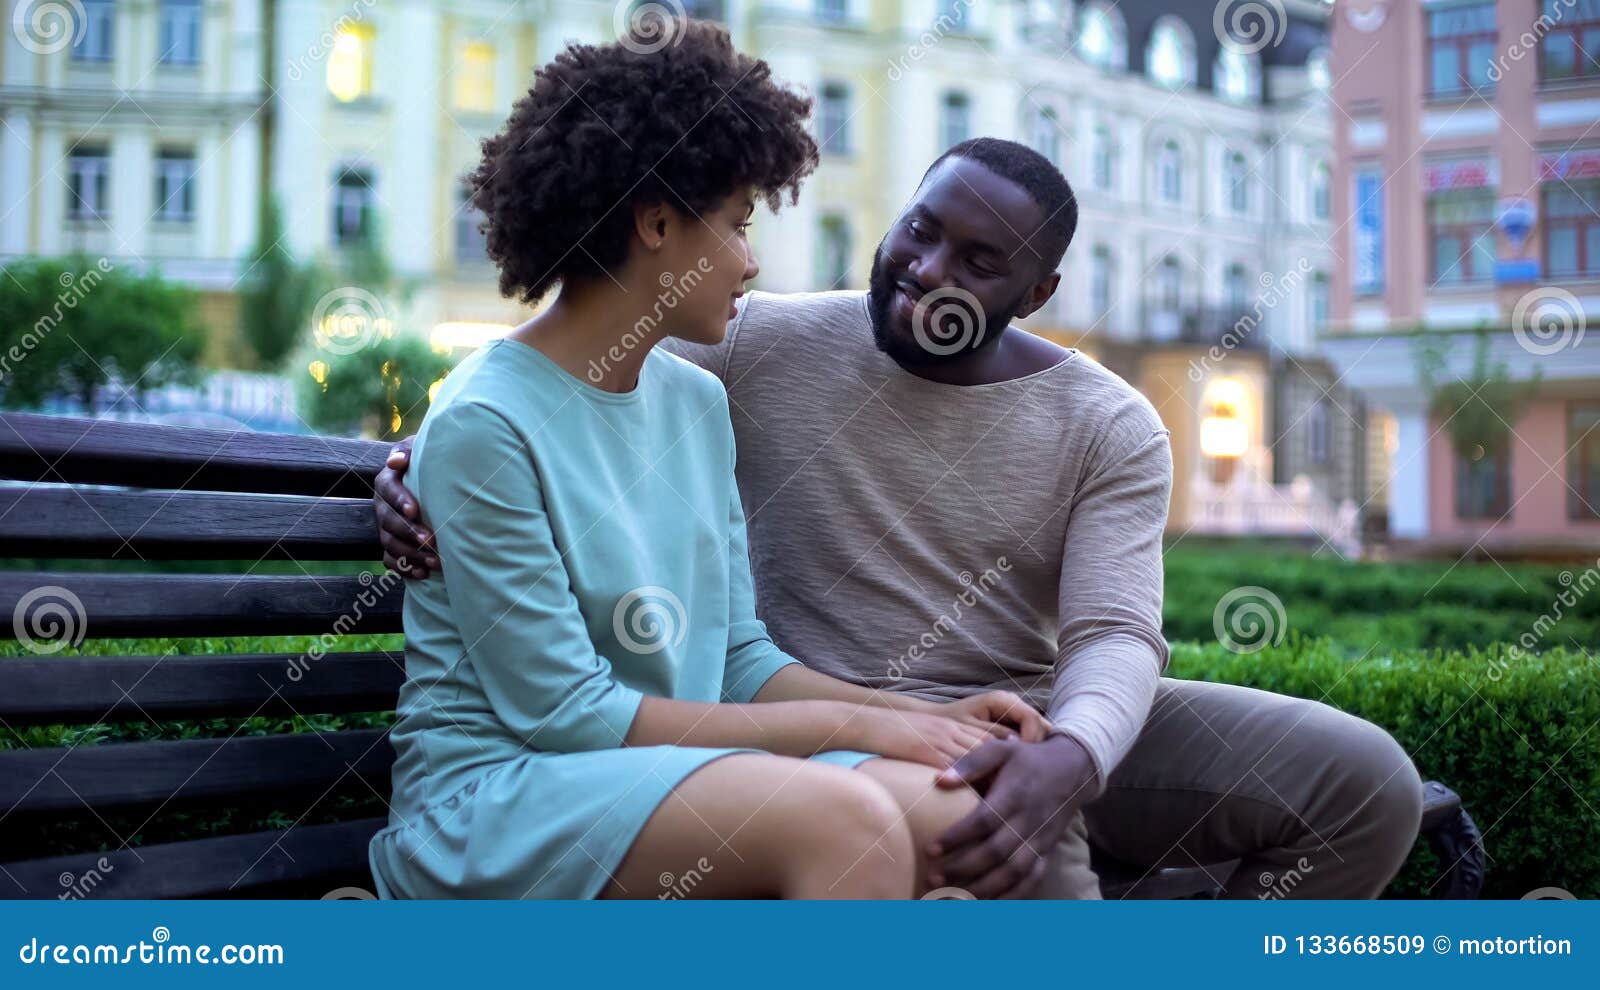 Young African Couple Cuddling On Bench At Sunset Date In City Park